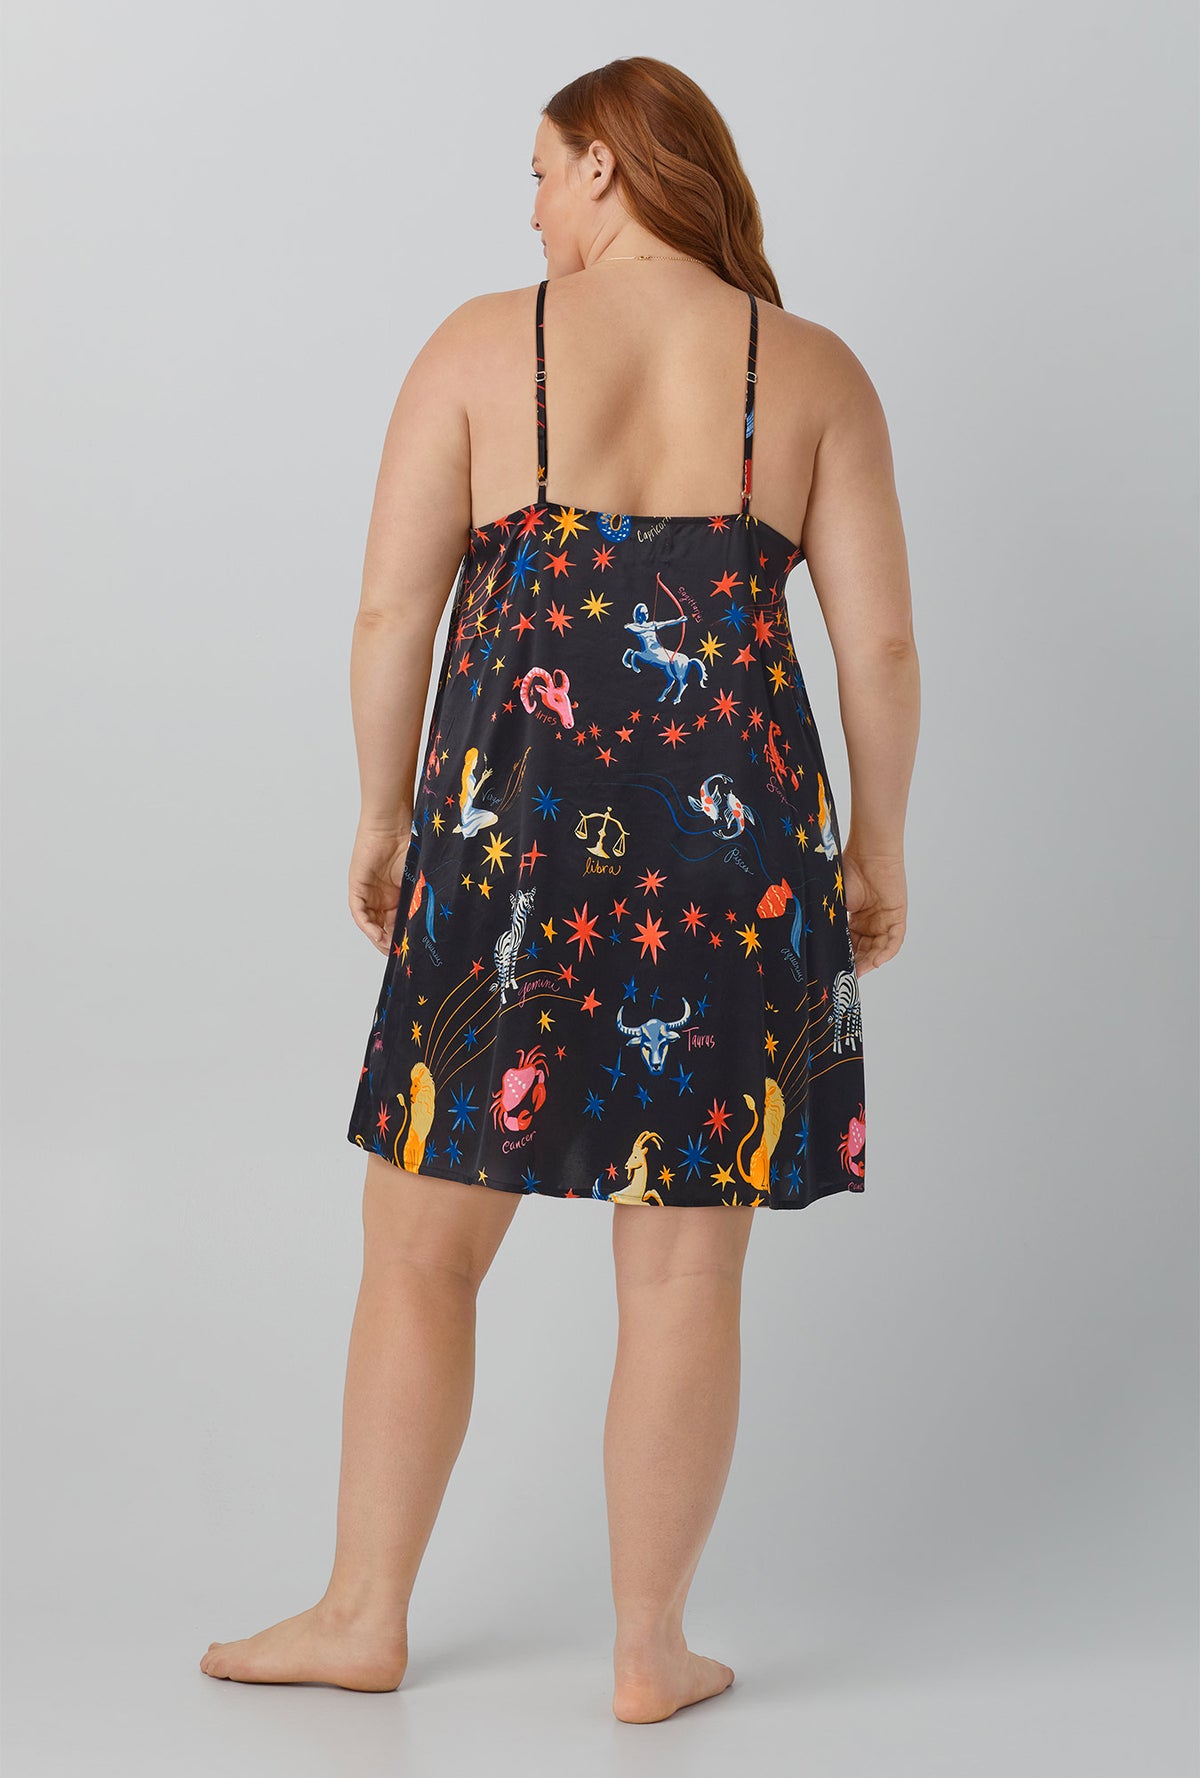 A lady wearing black Washable Silk Satin Chemise with Celestial Dreams print